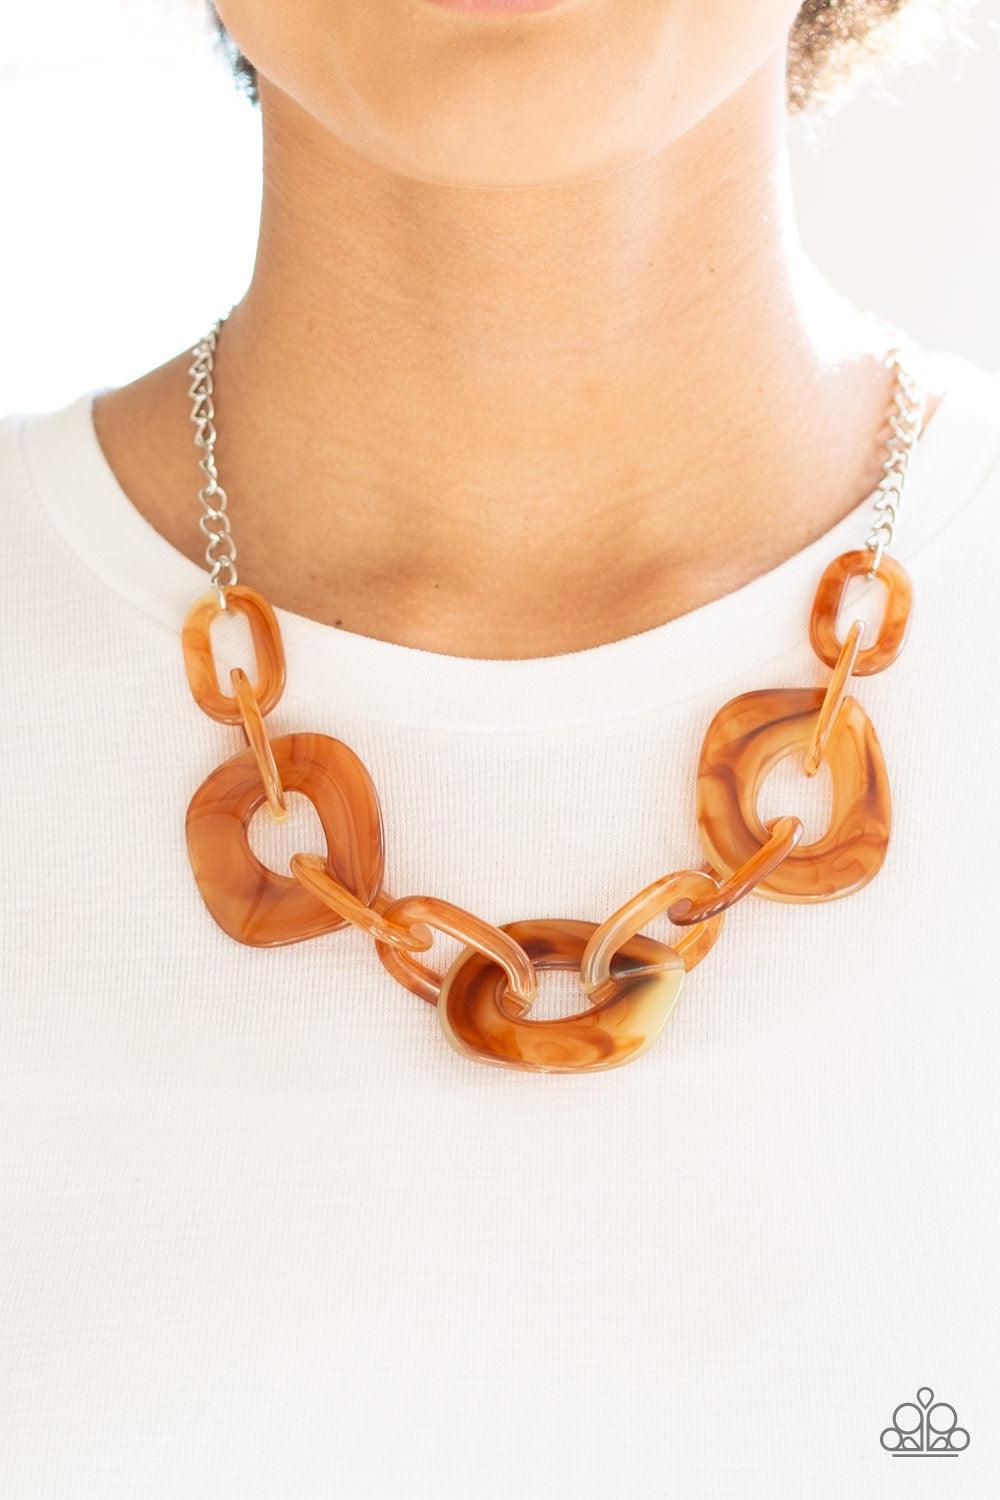 Paparazzi Accessories Courageously Chromatic - Brown Brushed in a faux-marble finish, bold brown links connect below the collar for a statement making look. Features an adjustable clasp closure. Jewelry